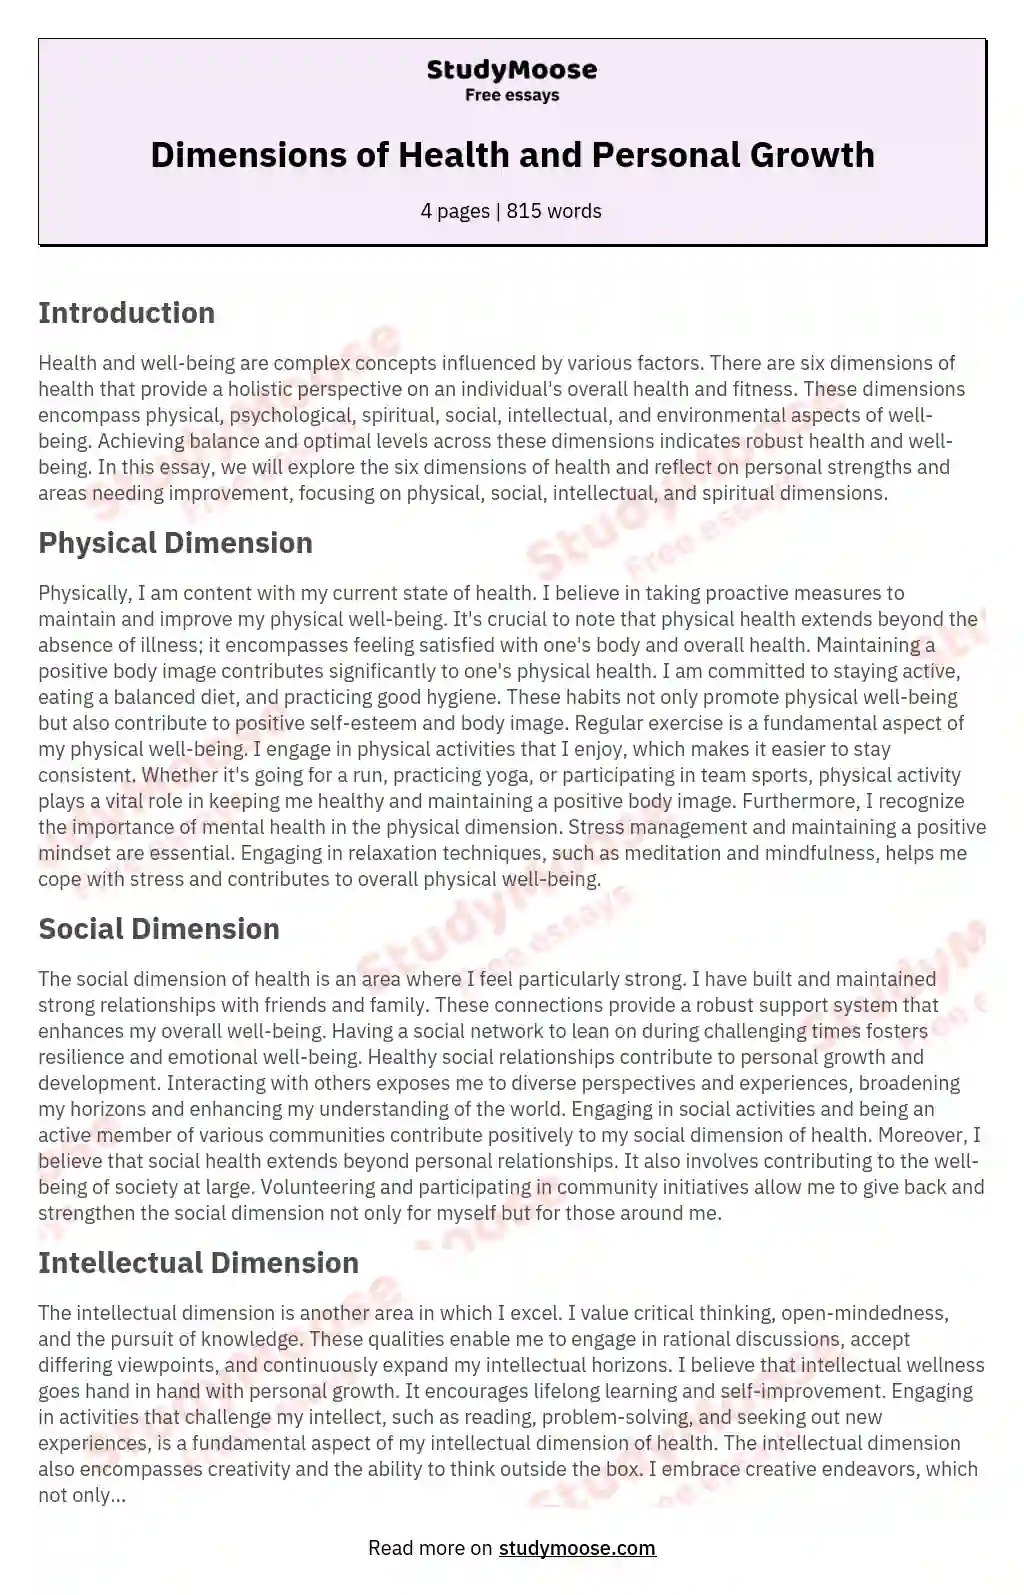 Dimensions of Health and Personal Growth essay